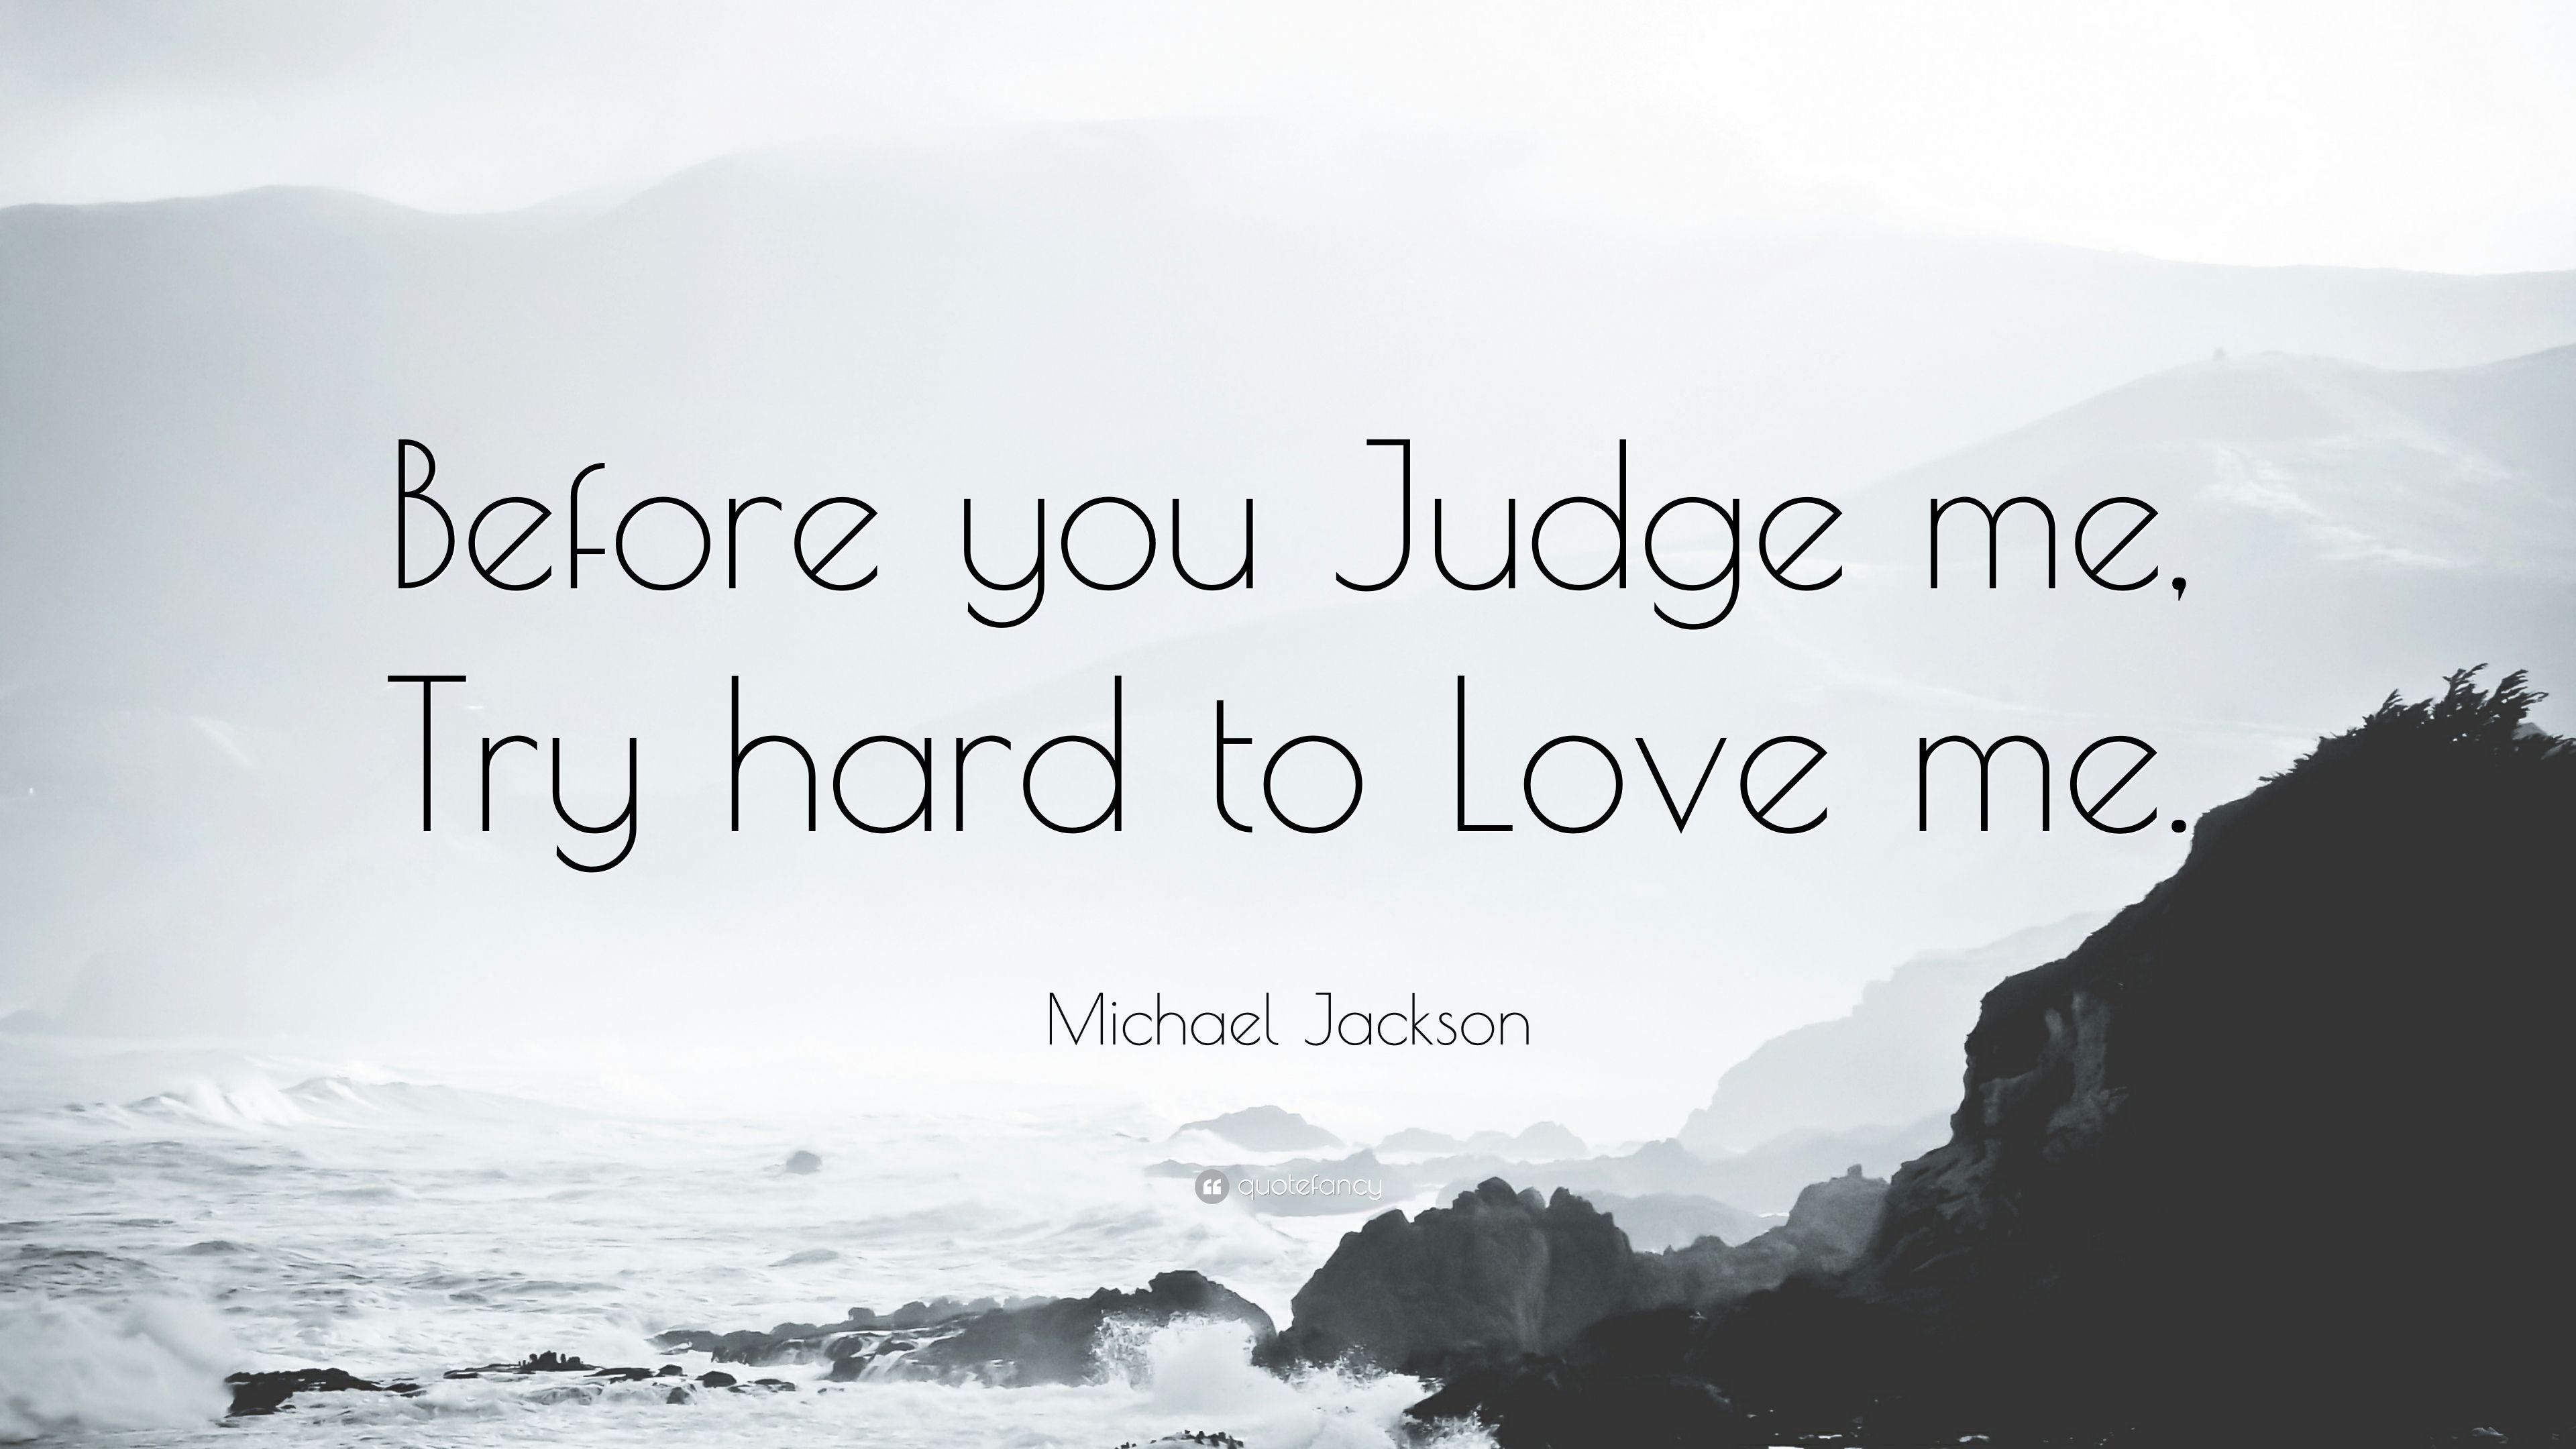 Michael Jackson Quote: “Before you Judge me, Try hard to Love me